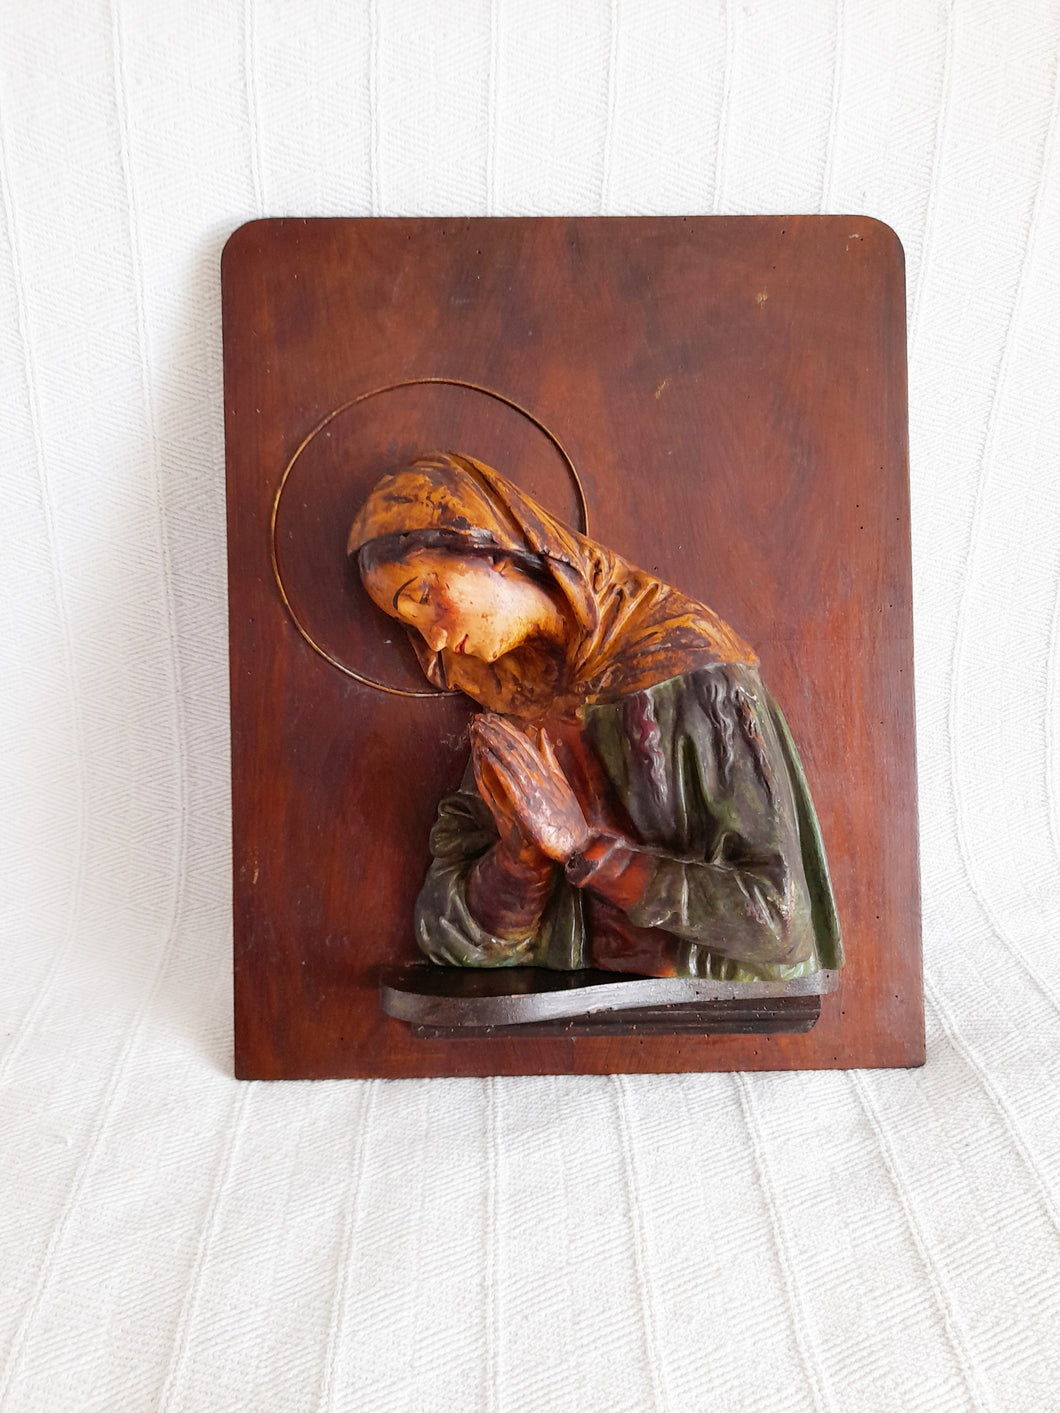 Virgin Mary Praying, Spanish Polychromed Plaster Relief on Board, 17th/18th Century, 50 x 40 x 14 Centimetres